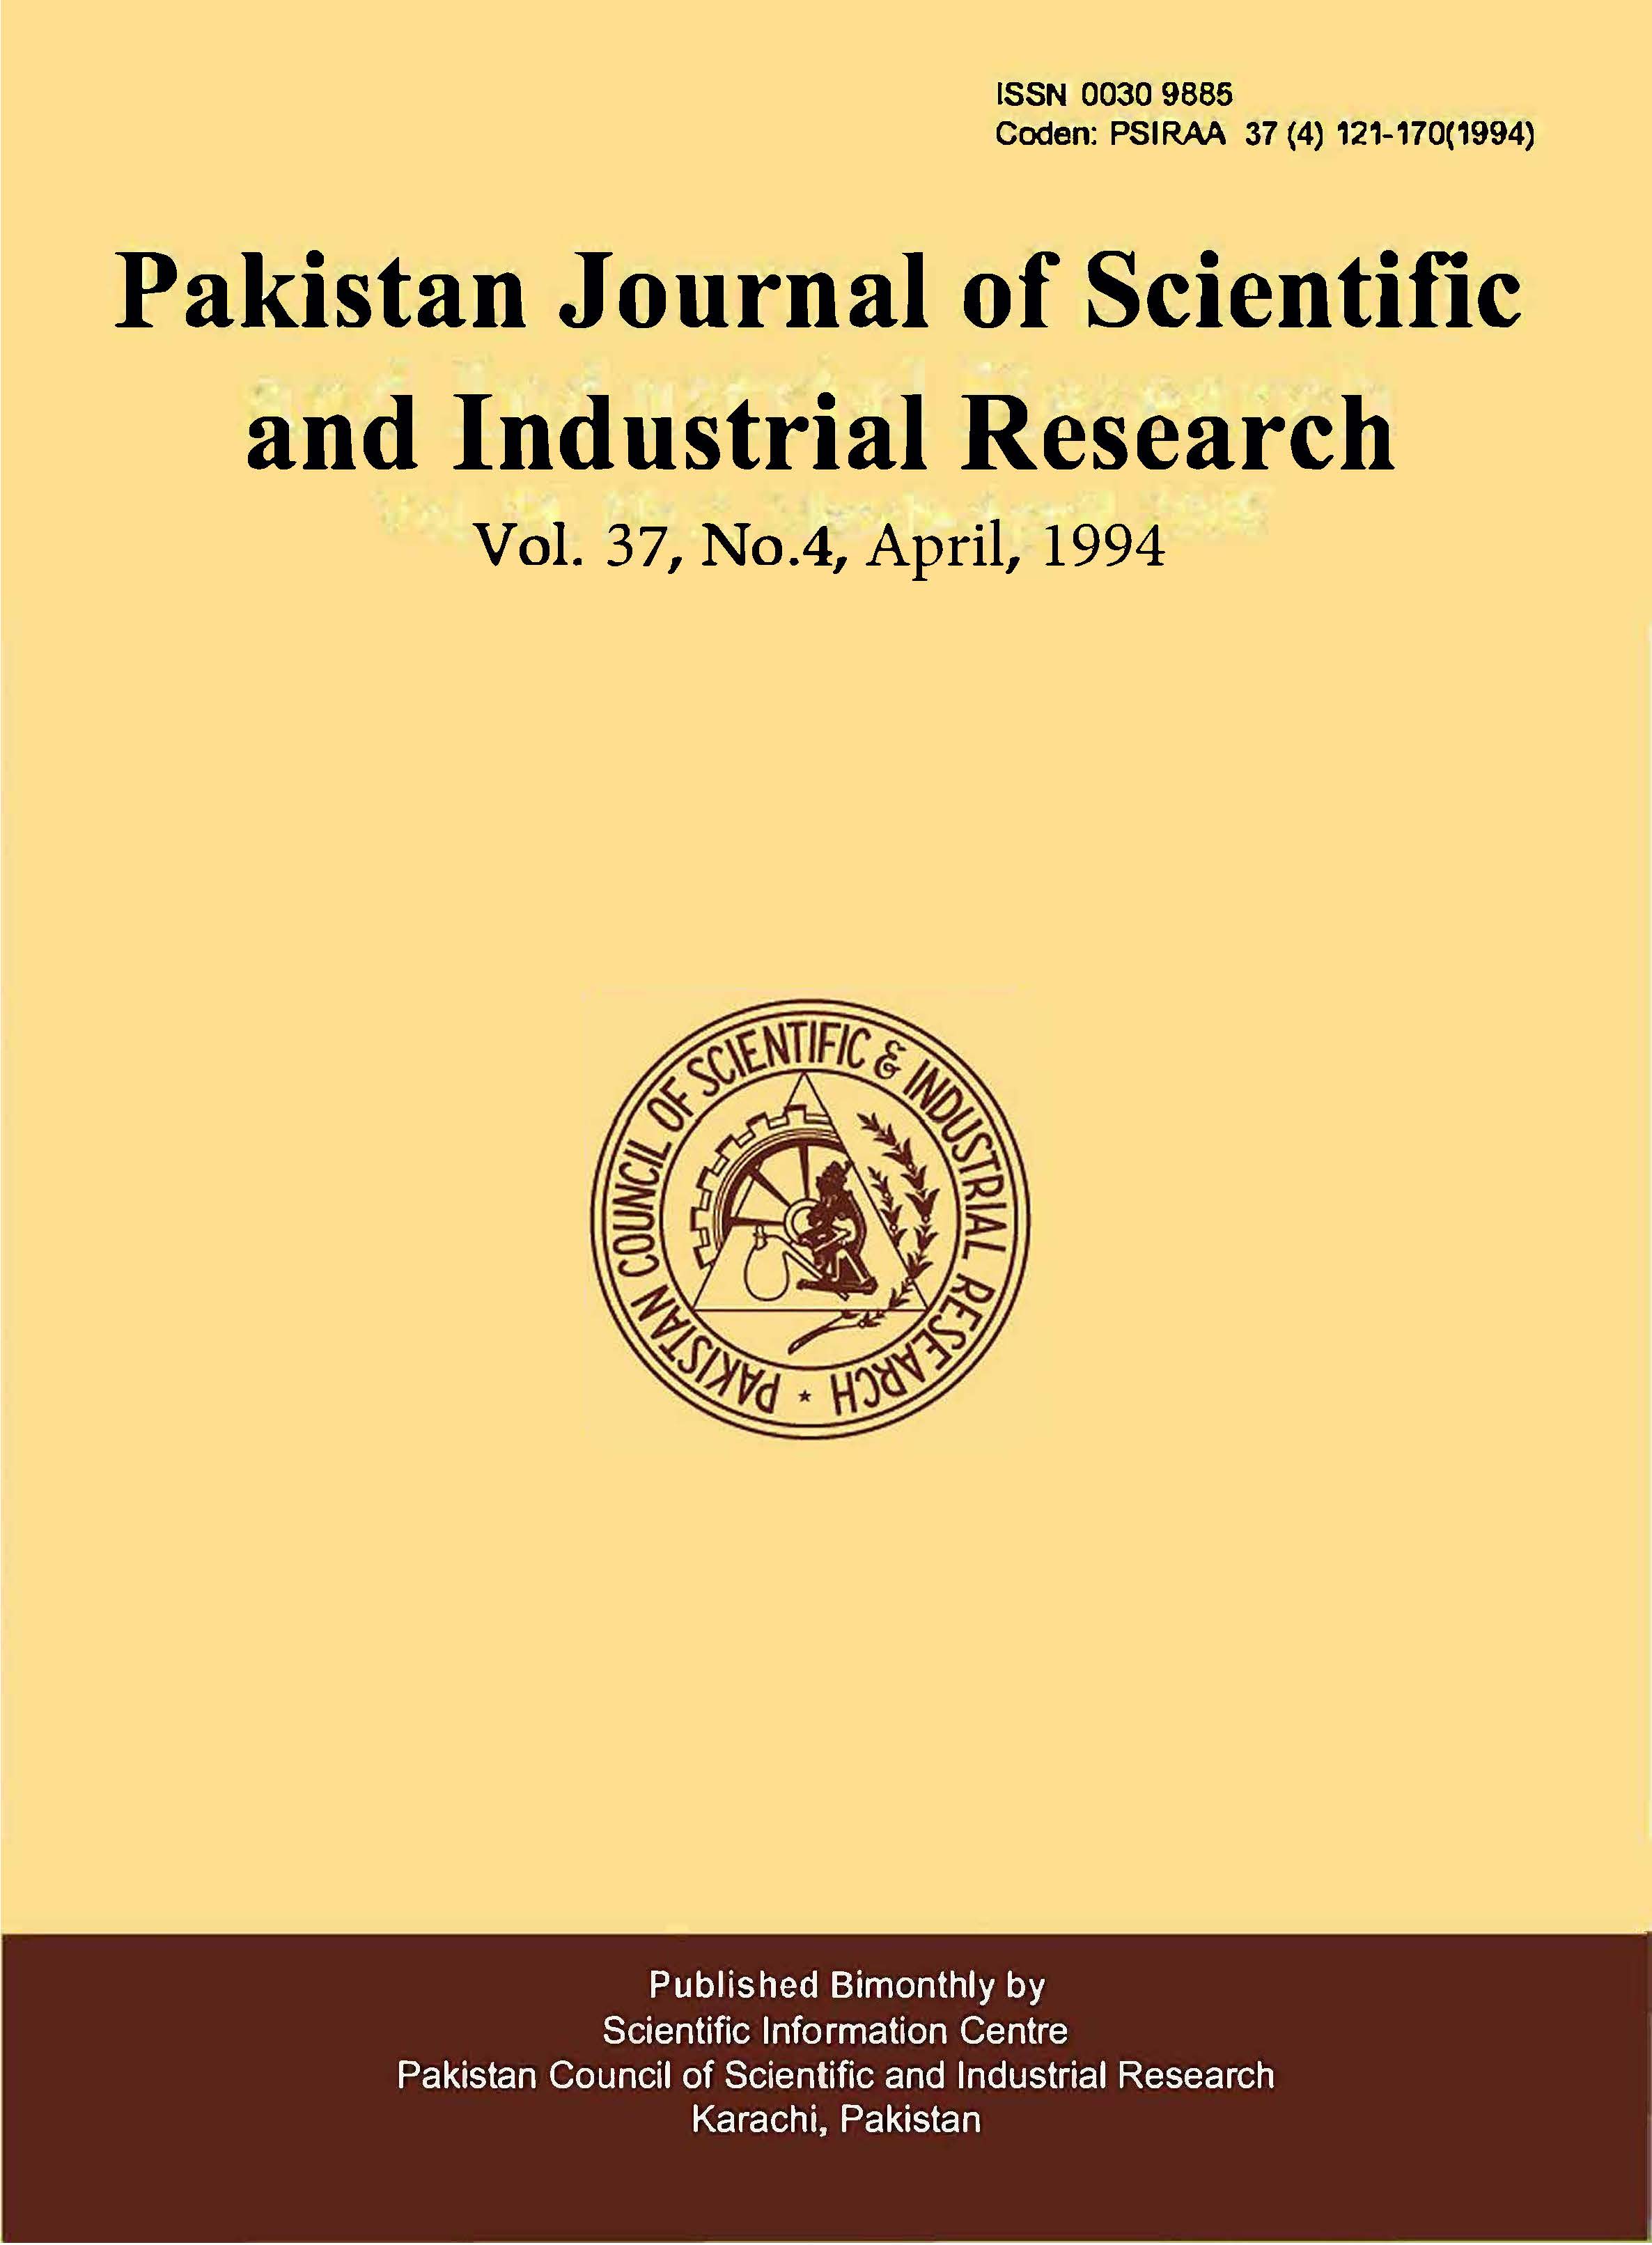 					View Vol. 37 No. 4 (1994): Pakistan Journal of Scientific and Industrial Research
				